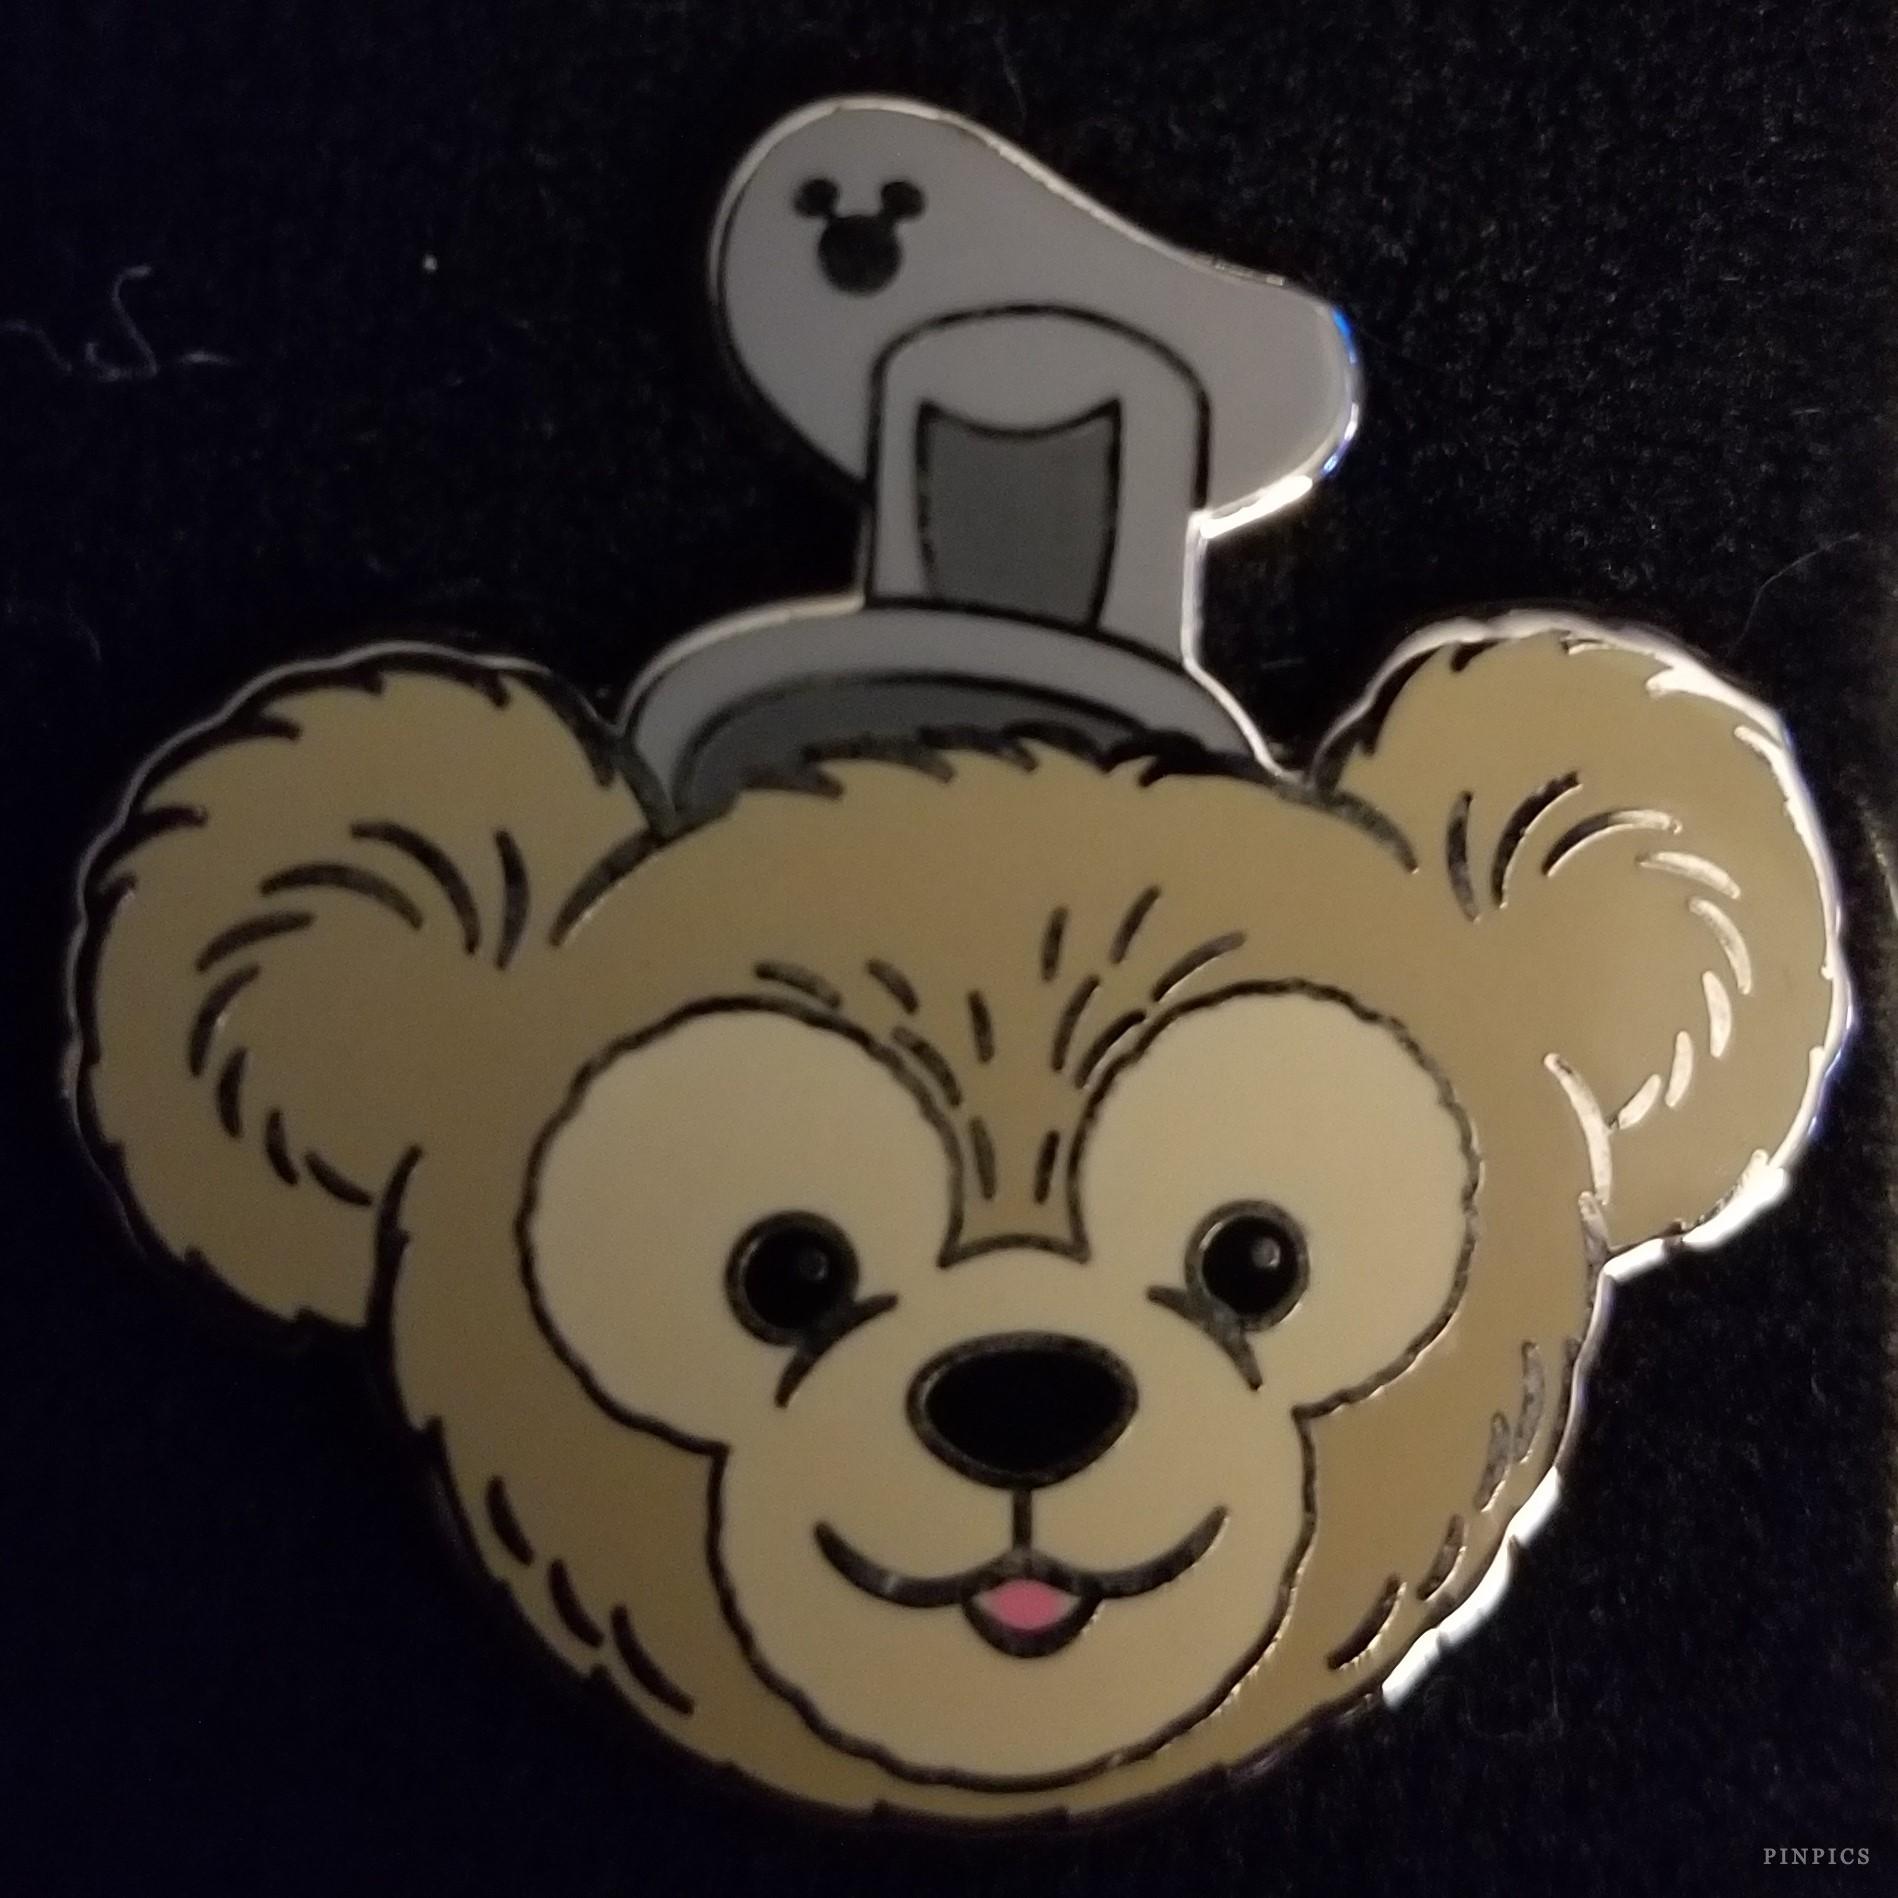 WDW - 2013 Hidden Mickey Completer Pin - Duffy's Hats - Steamboat Willie (PWP)